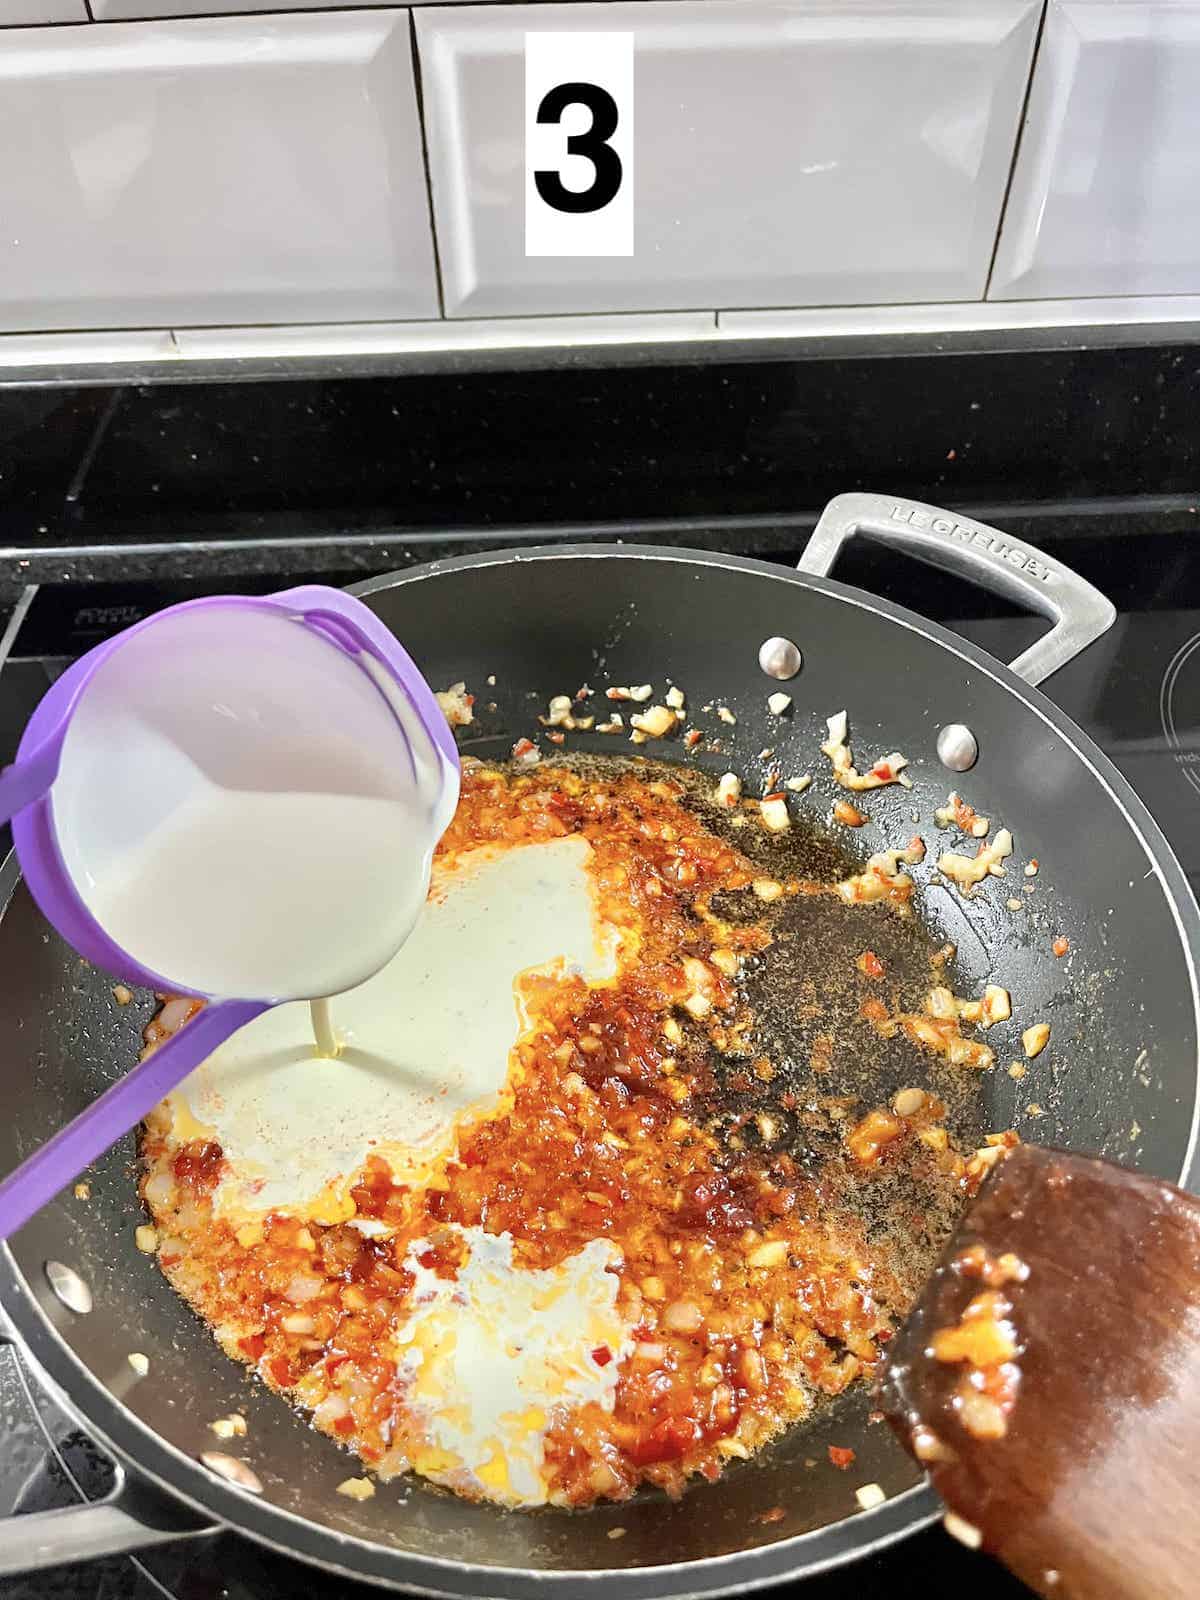 Adding a cup of heavy whipping cream to a pan of gochujang sauce.